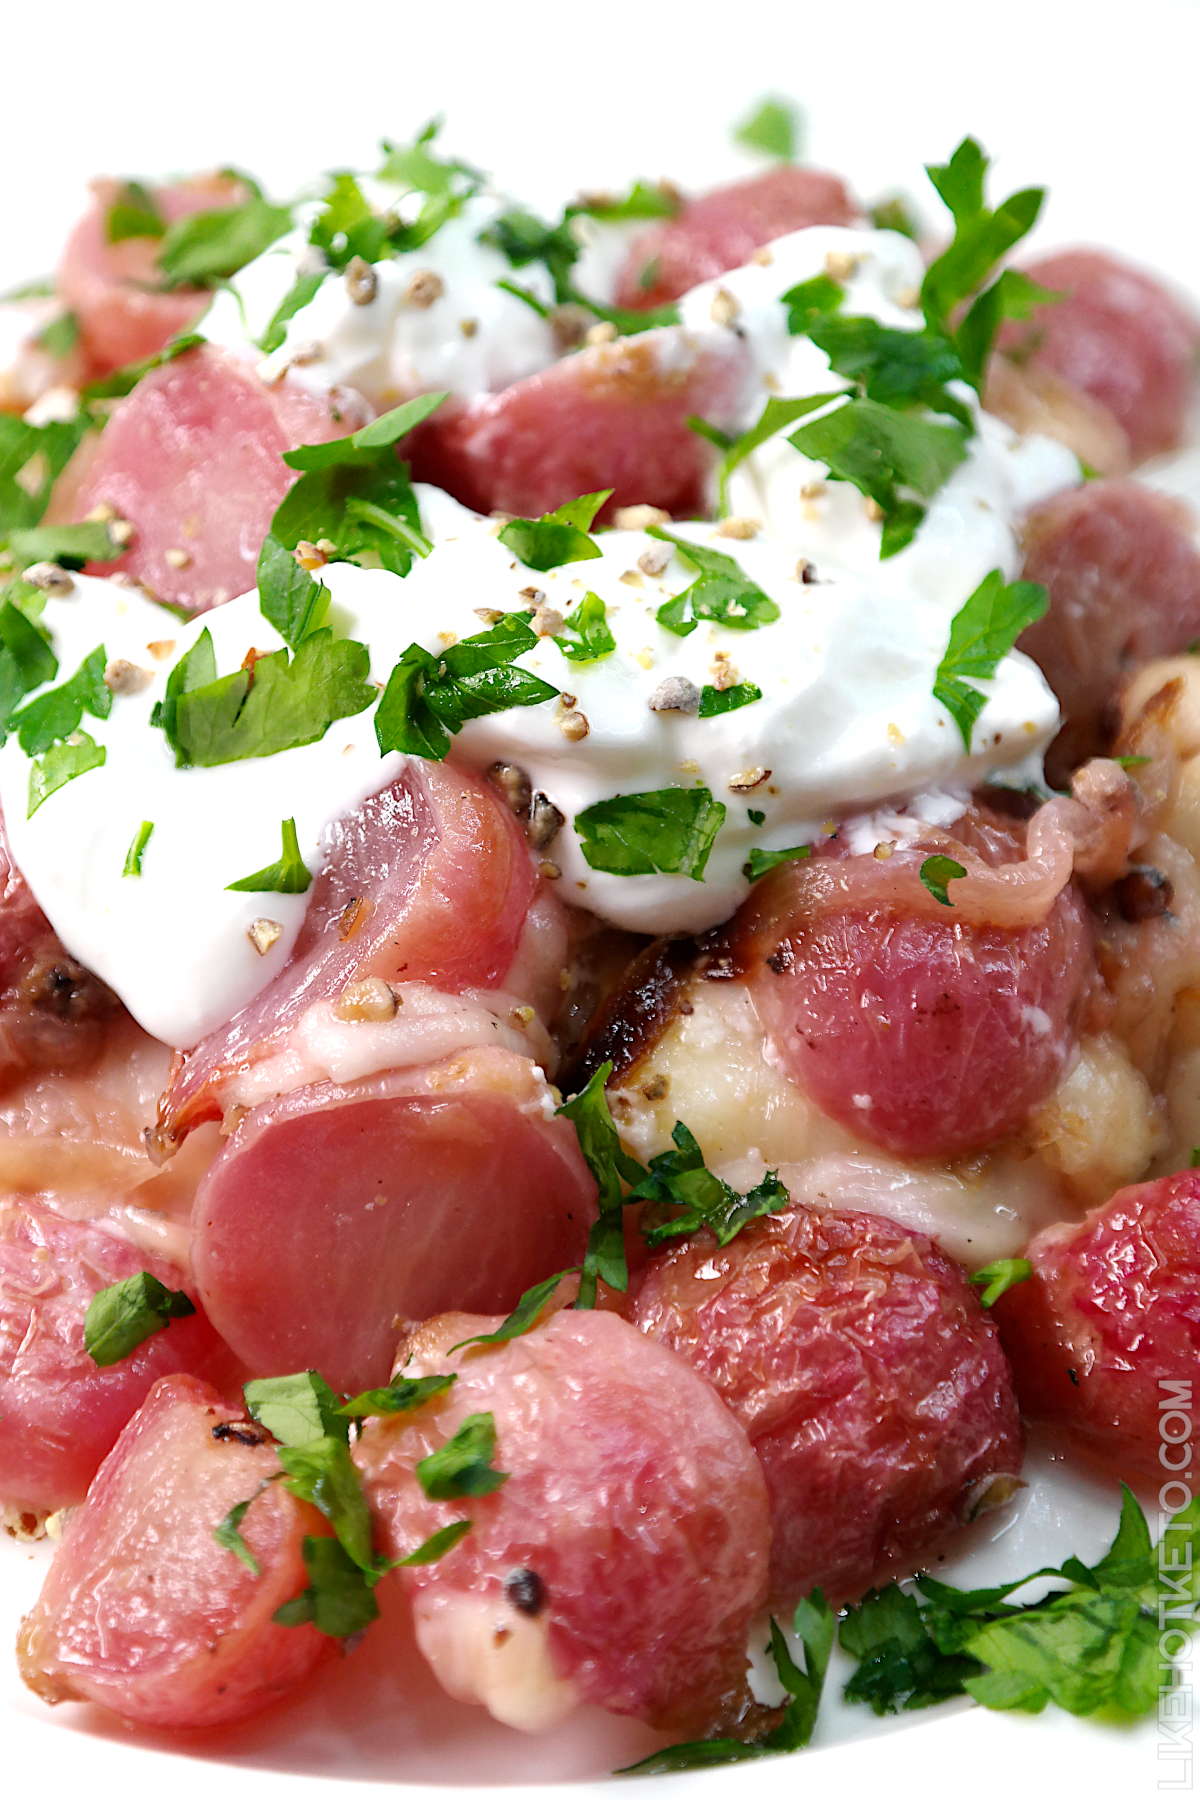 Radishes roasted in duck fat and topped with sour cream as a keto side dish.